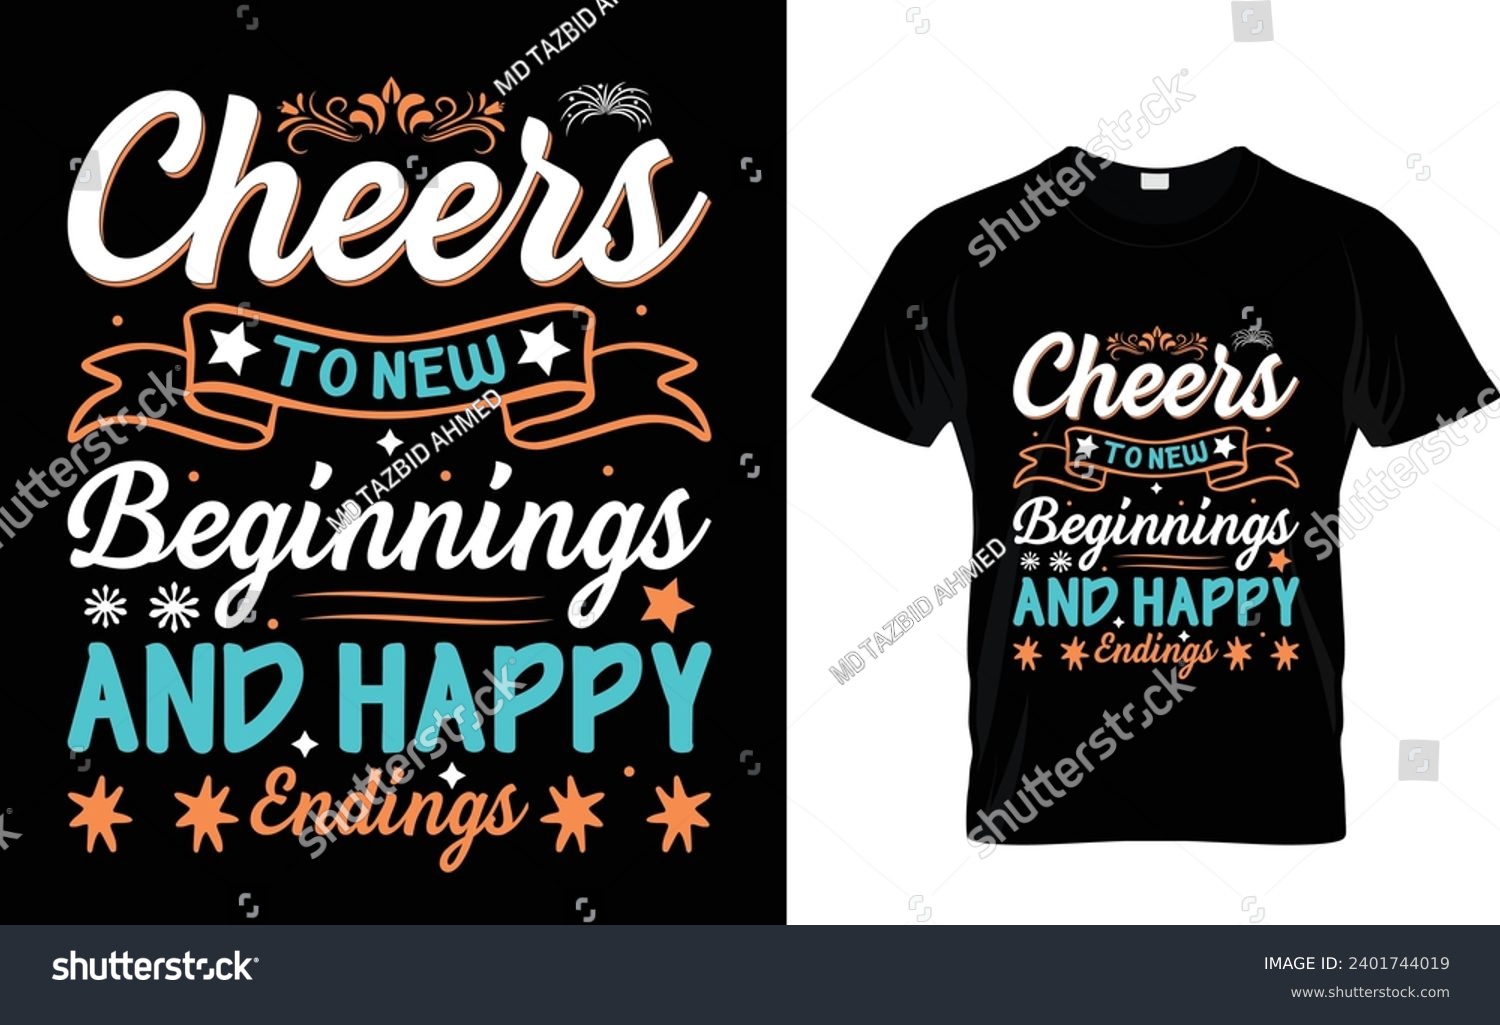 SVG of Cheers  to new  beginnings  and happy endings  
Happy new year 2024 t-shirt design, New year t-shirt design, 2024 t-shirt design svg